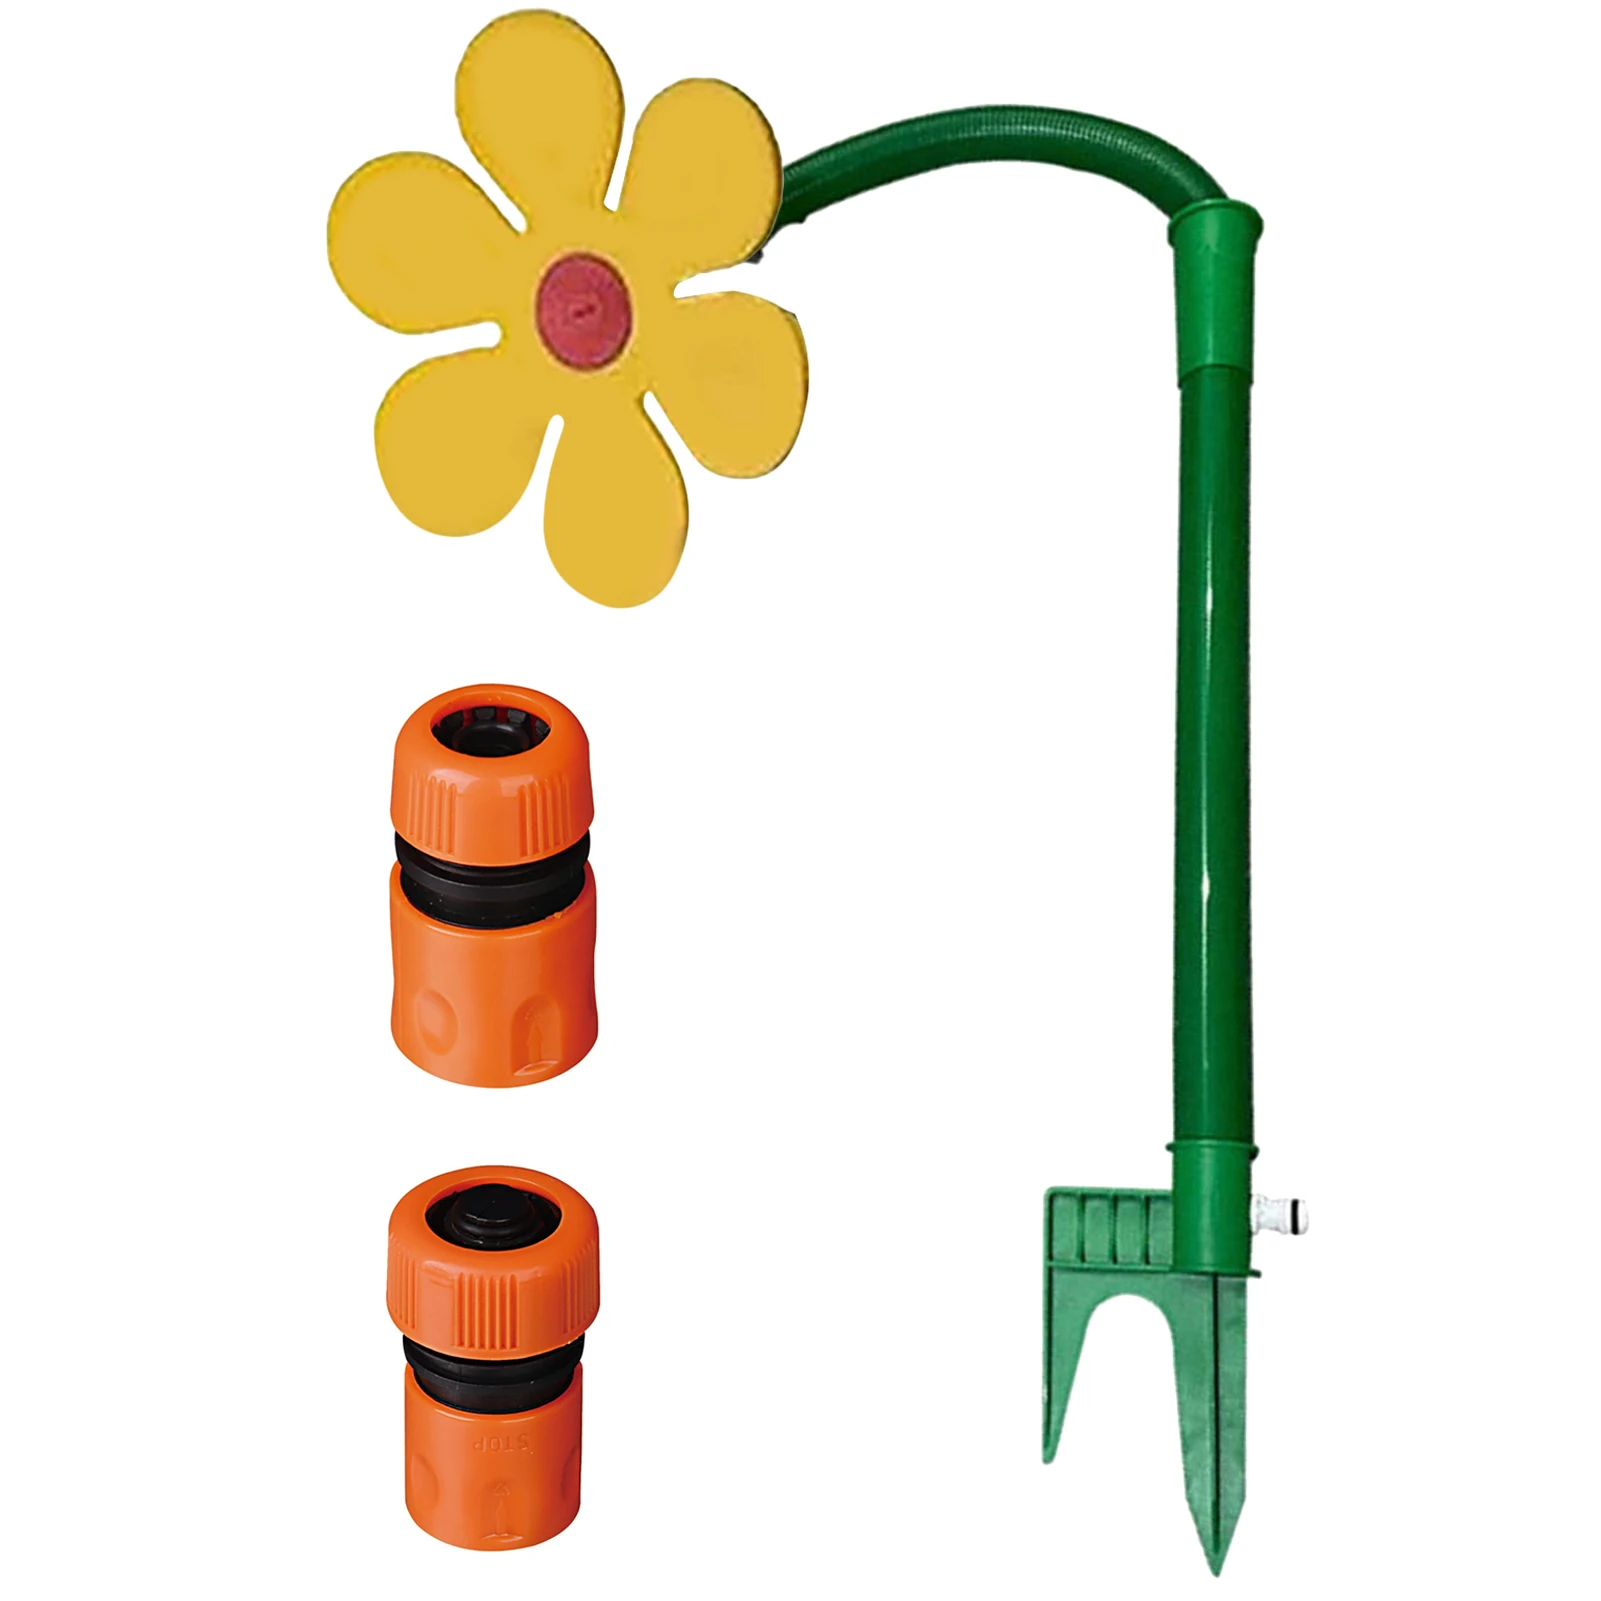 Garden Sprinkler Watering Tool Flower Shape Crazy Whirling Yard Lawn Watering Funny Dancing Daisy Water Spray Toy for Children